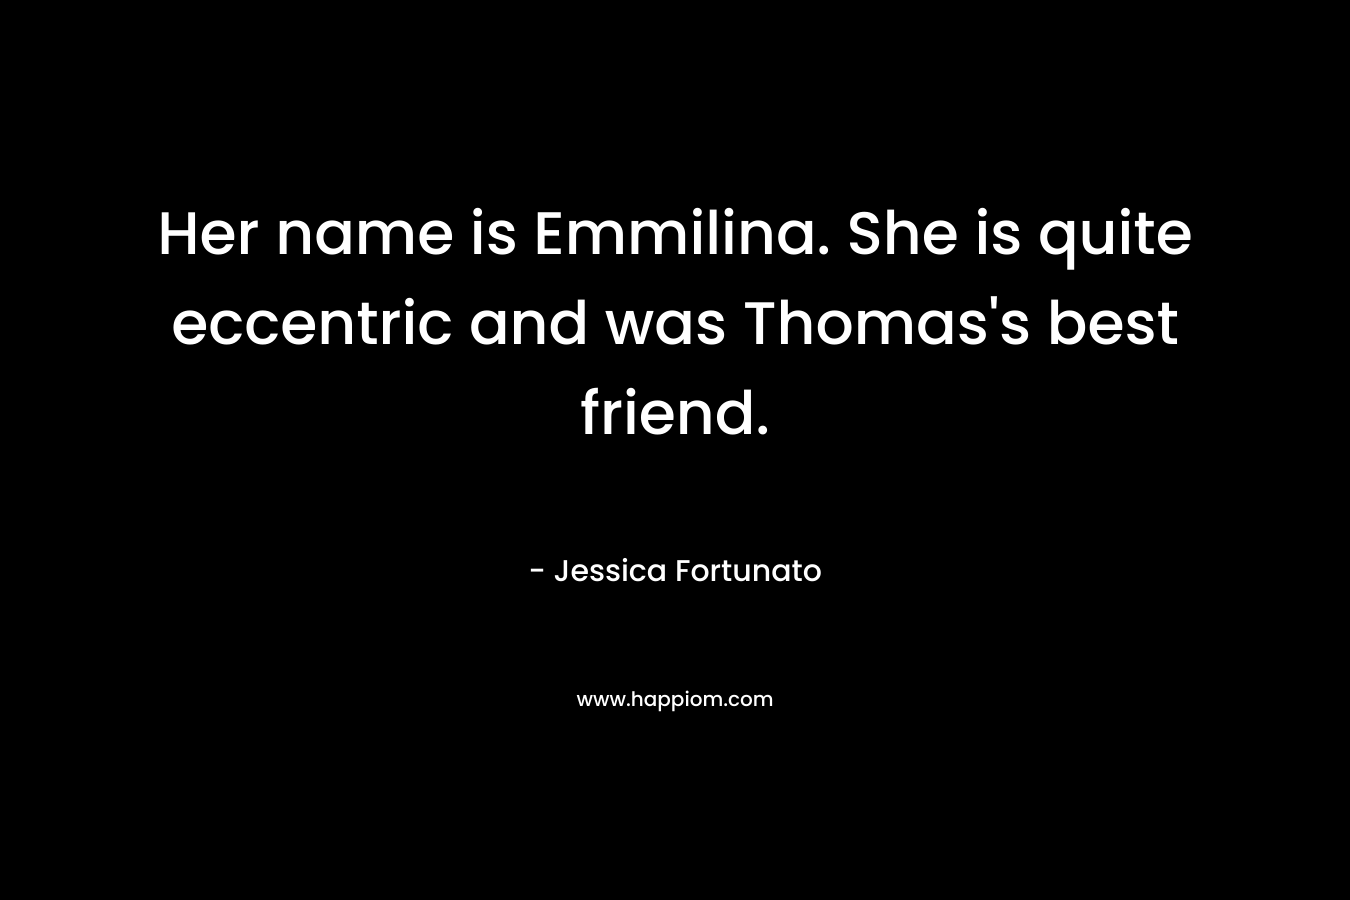 Her name is Emmilina. She is quite eccentric and was Thomas’s best friend. – Jessica Fortunato